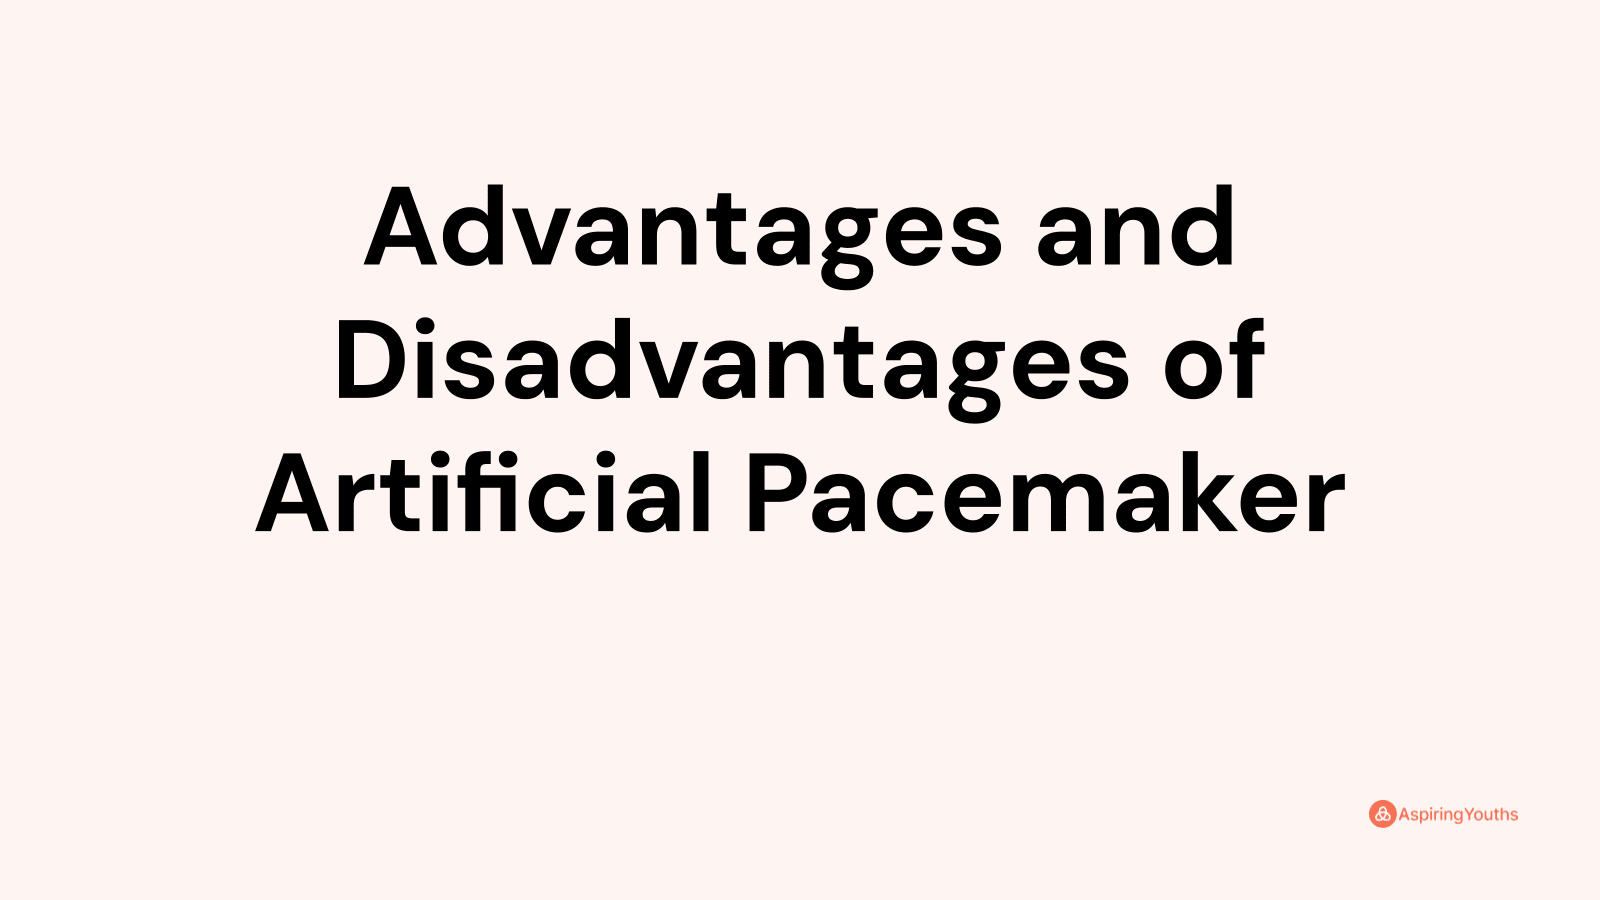 Advantages and disadvantages of Artificial Pacemaker